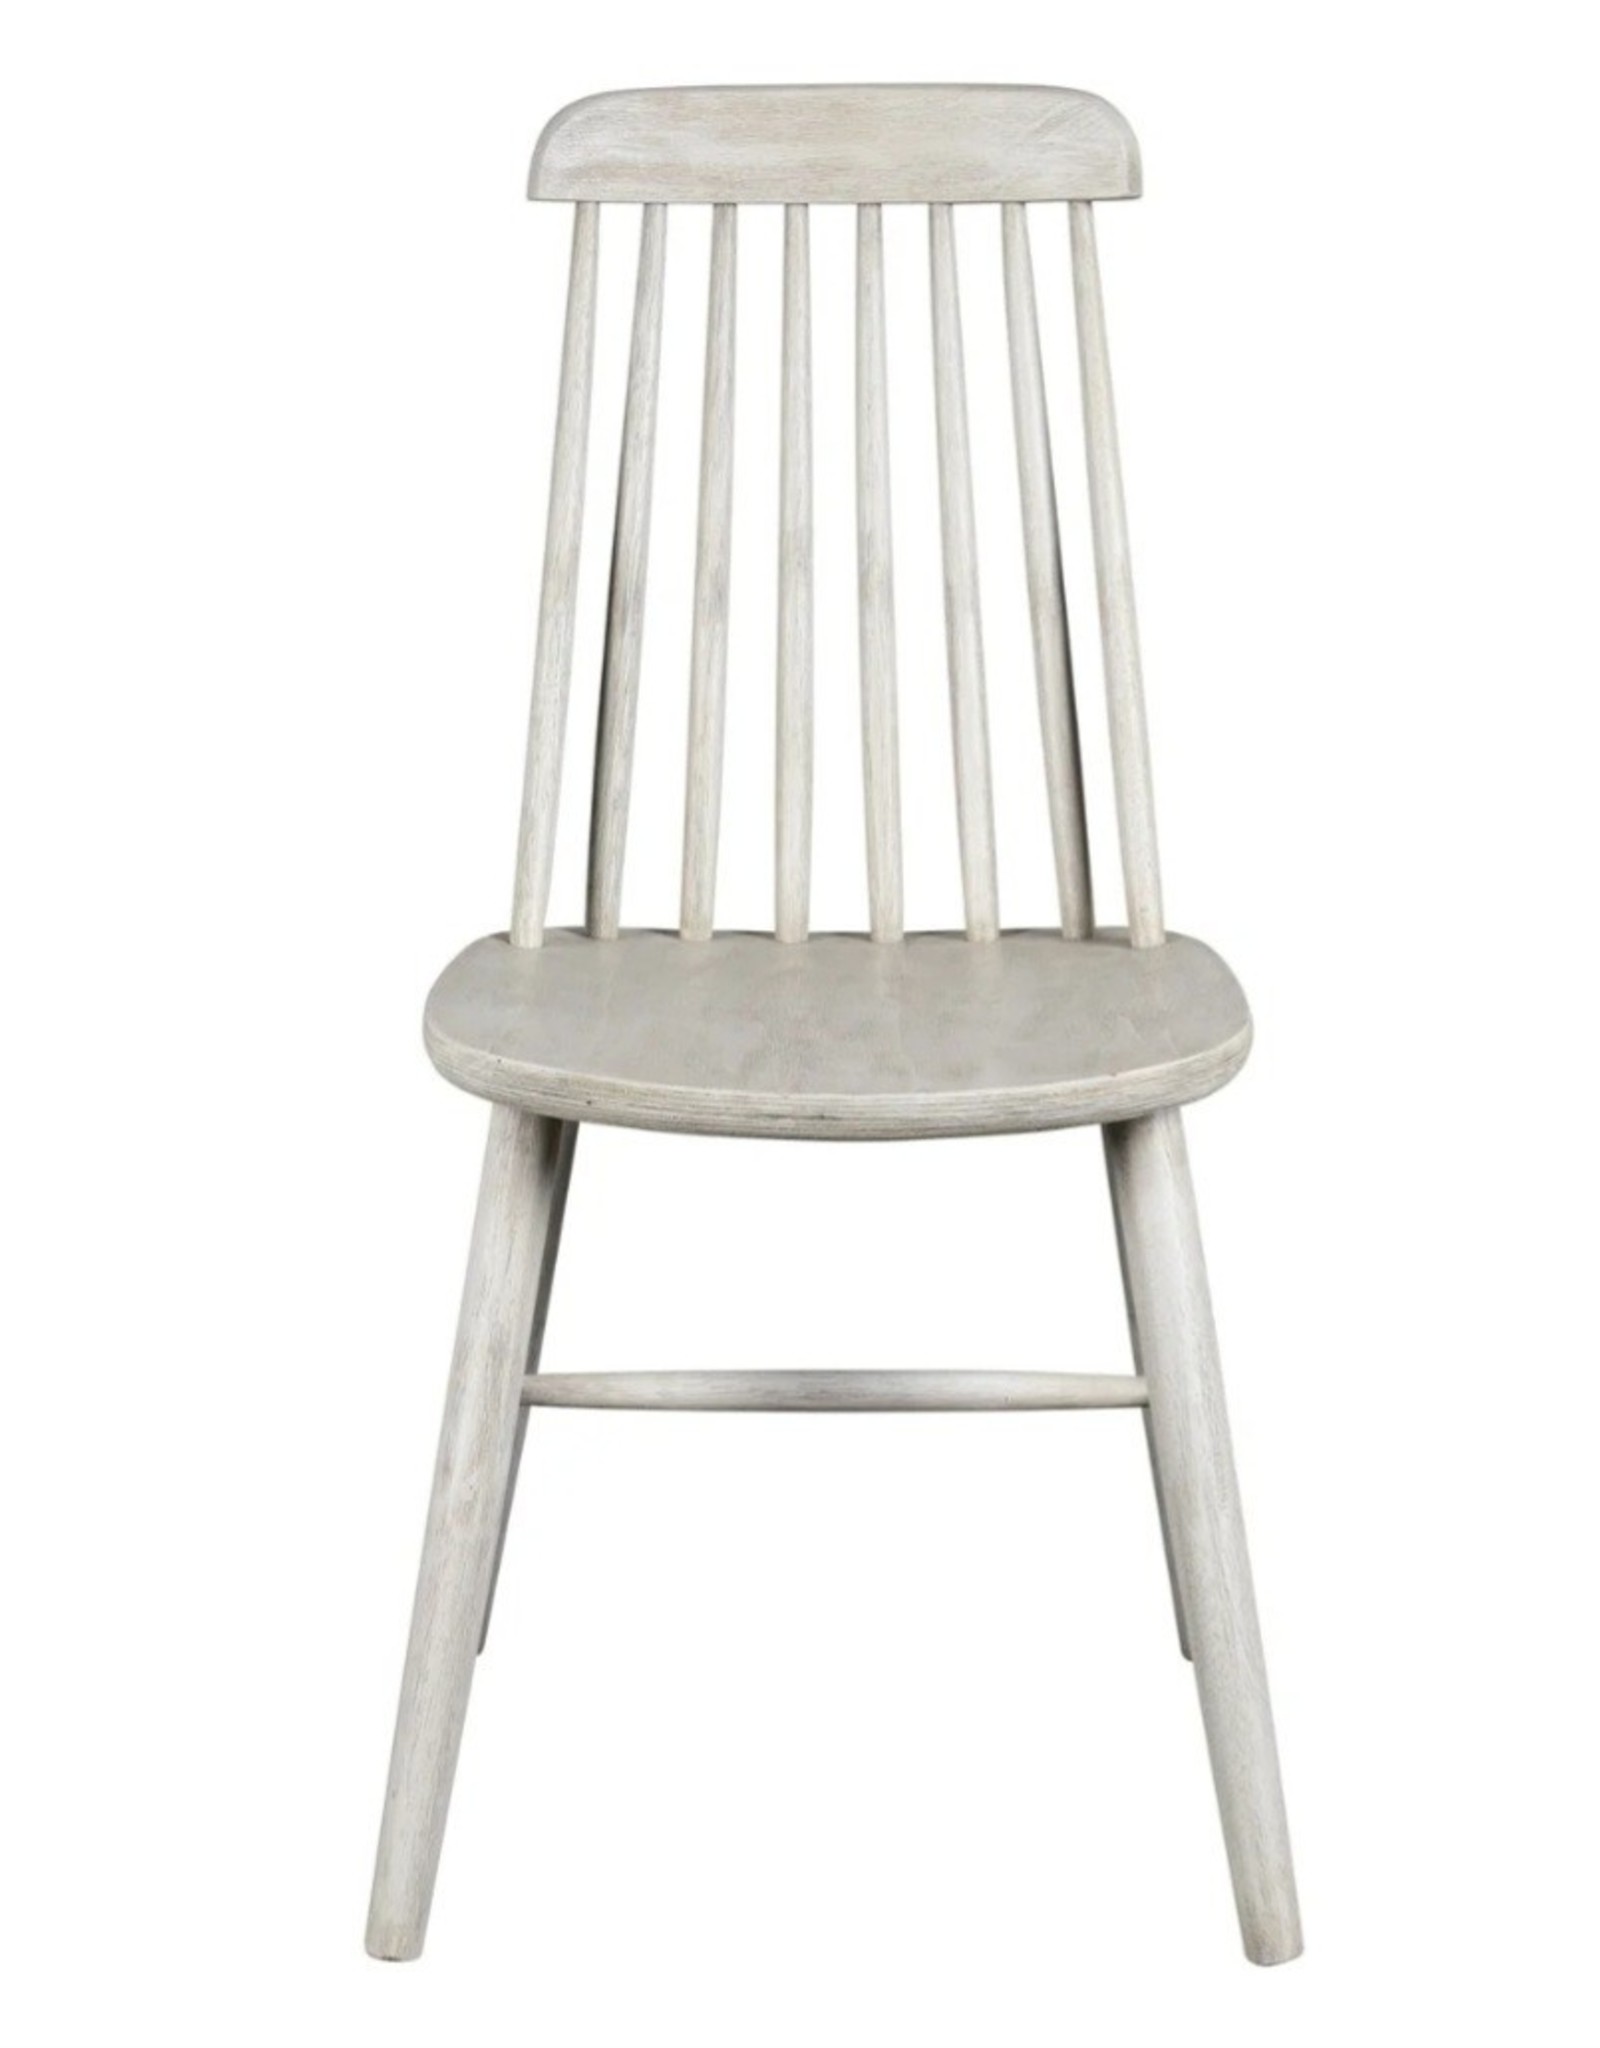 Forty West Designs Lloyd Spindle Dning Chair